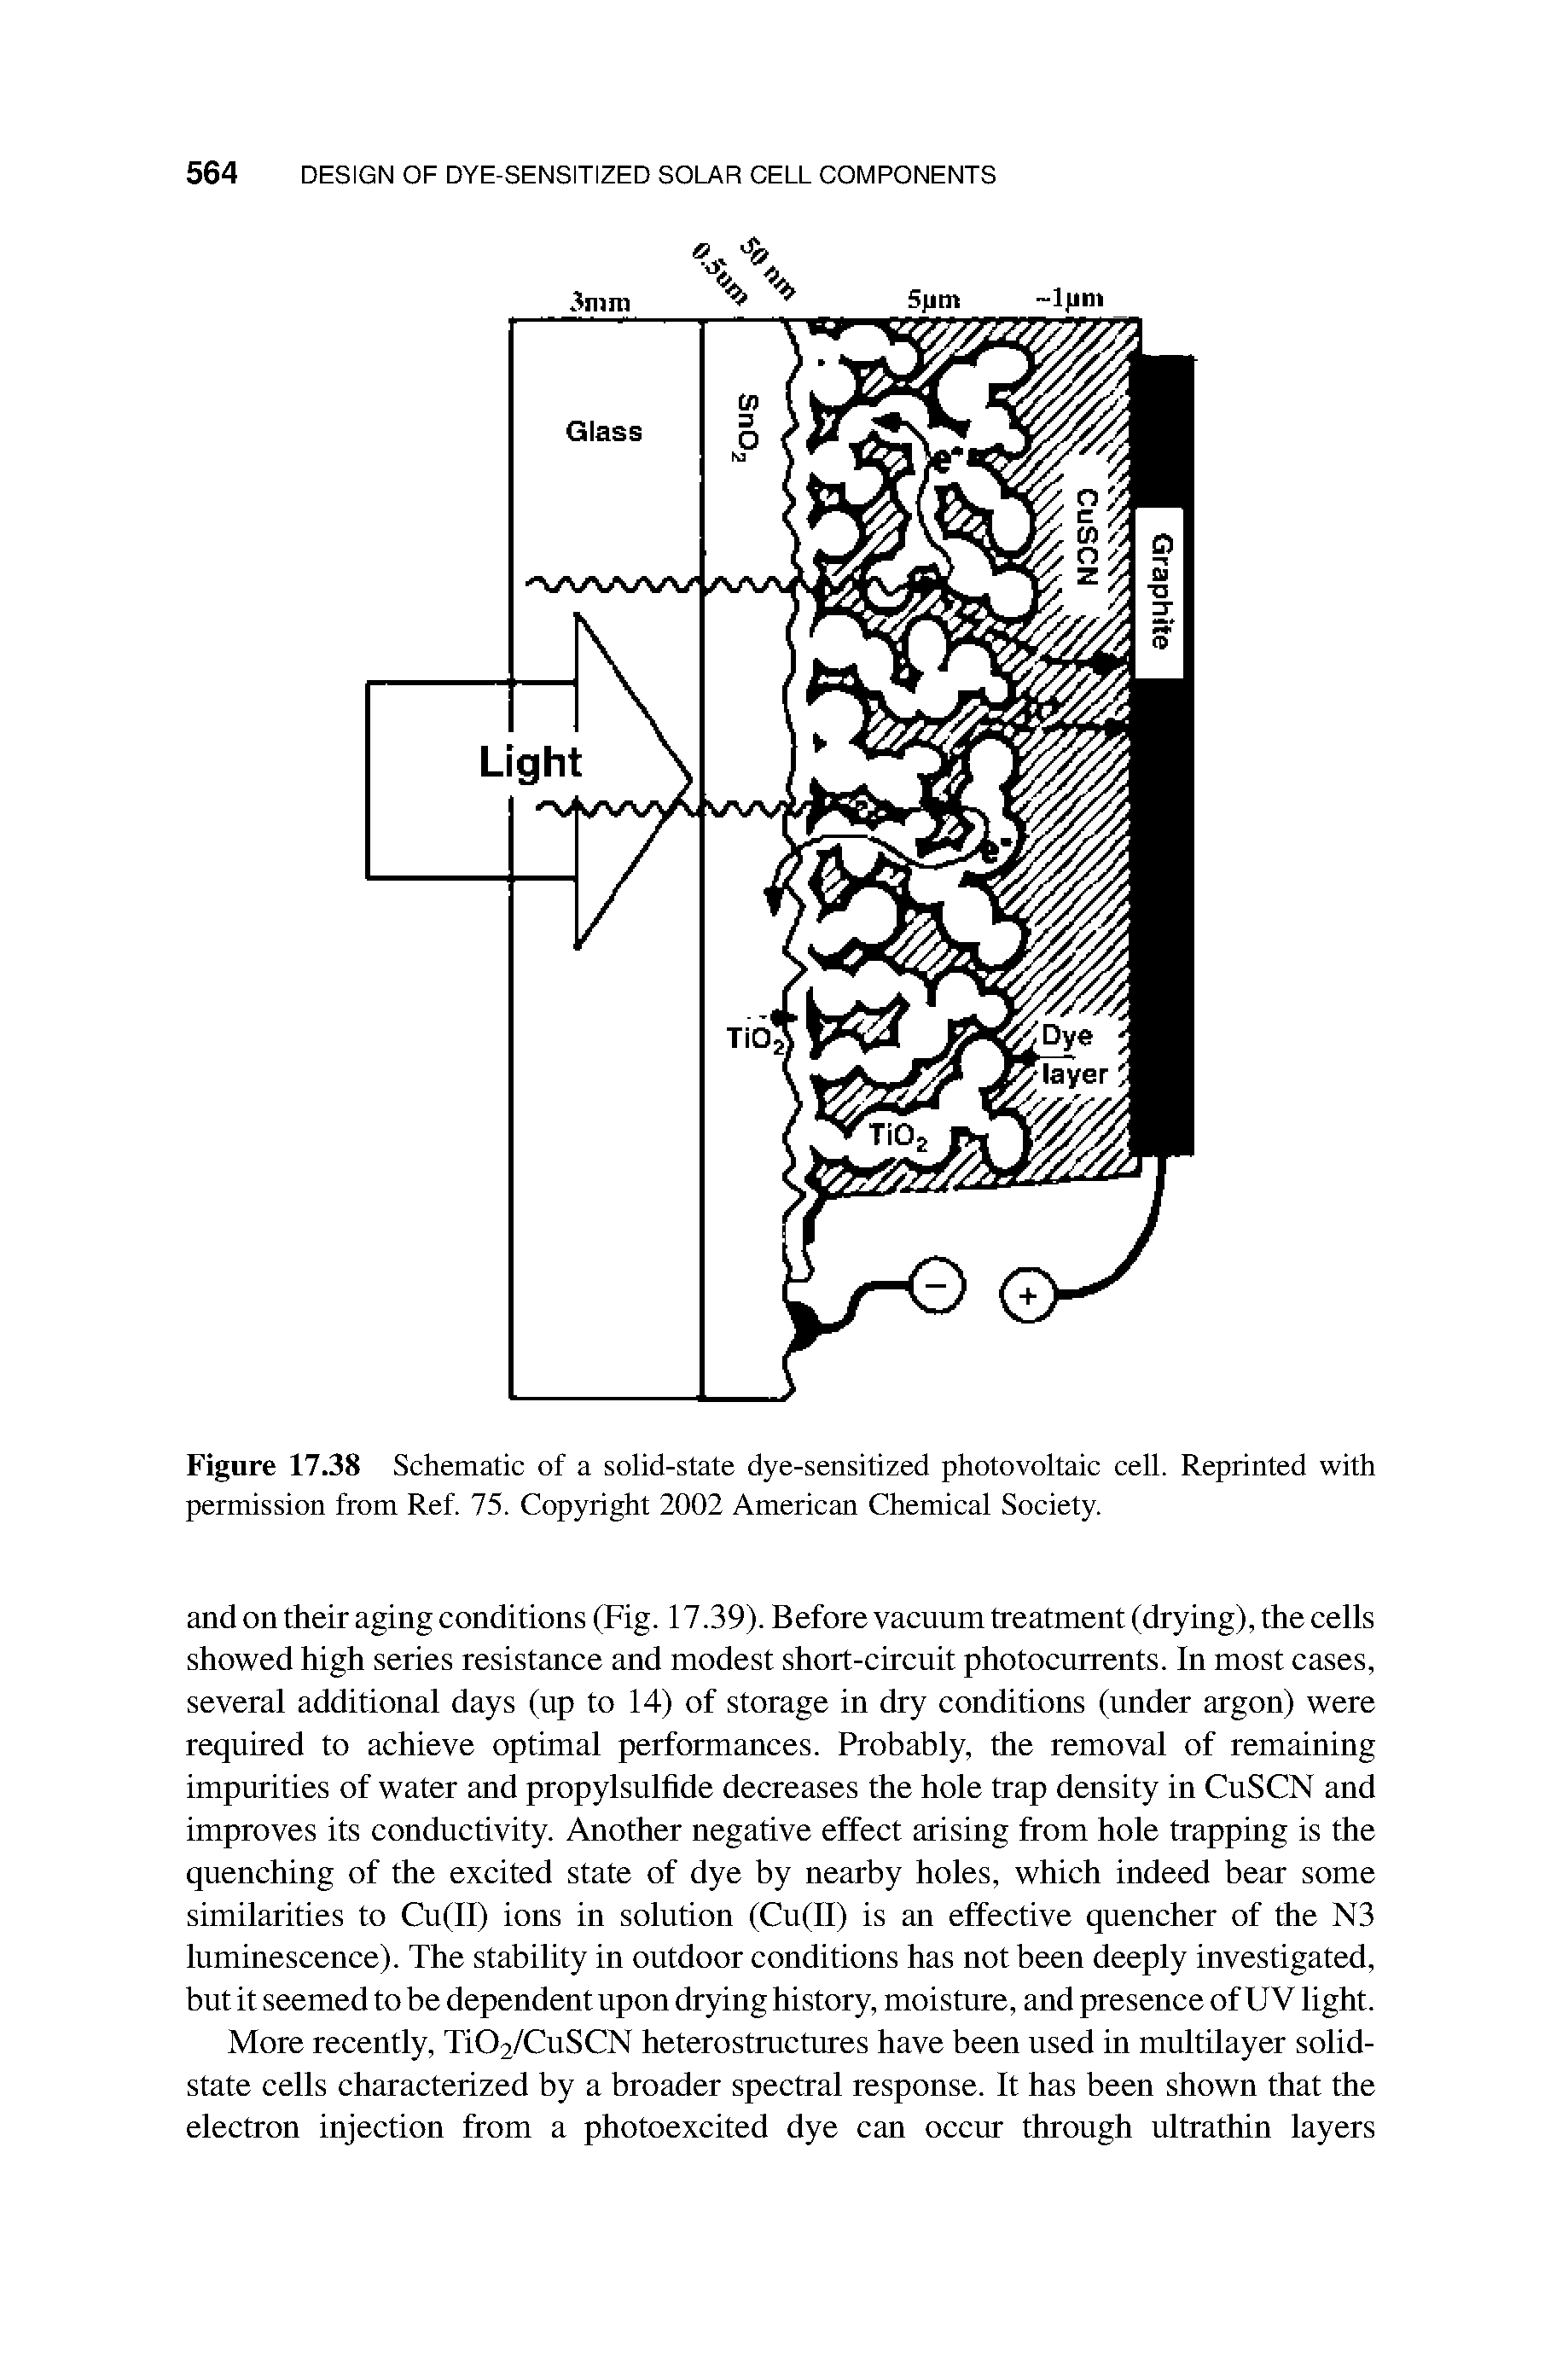 Figure 17.38 Schematic of a solid-state dye-sensitized photovoltaic cell. Reprinted with permission from Ref. 75. Copyright 2002 American Chemical Society.